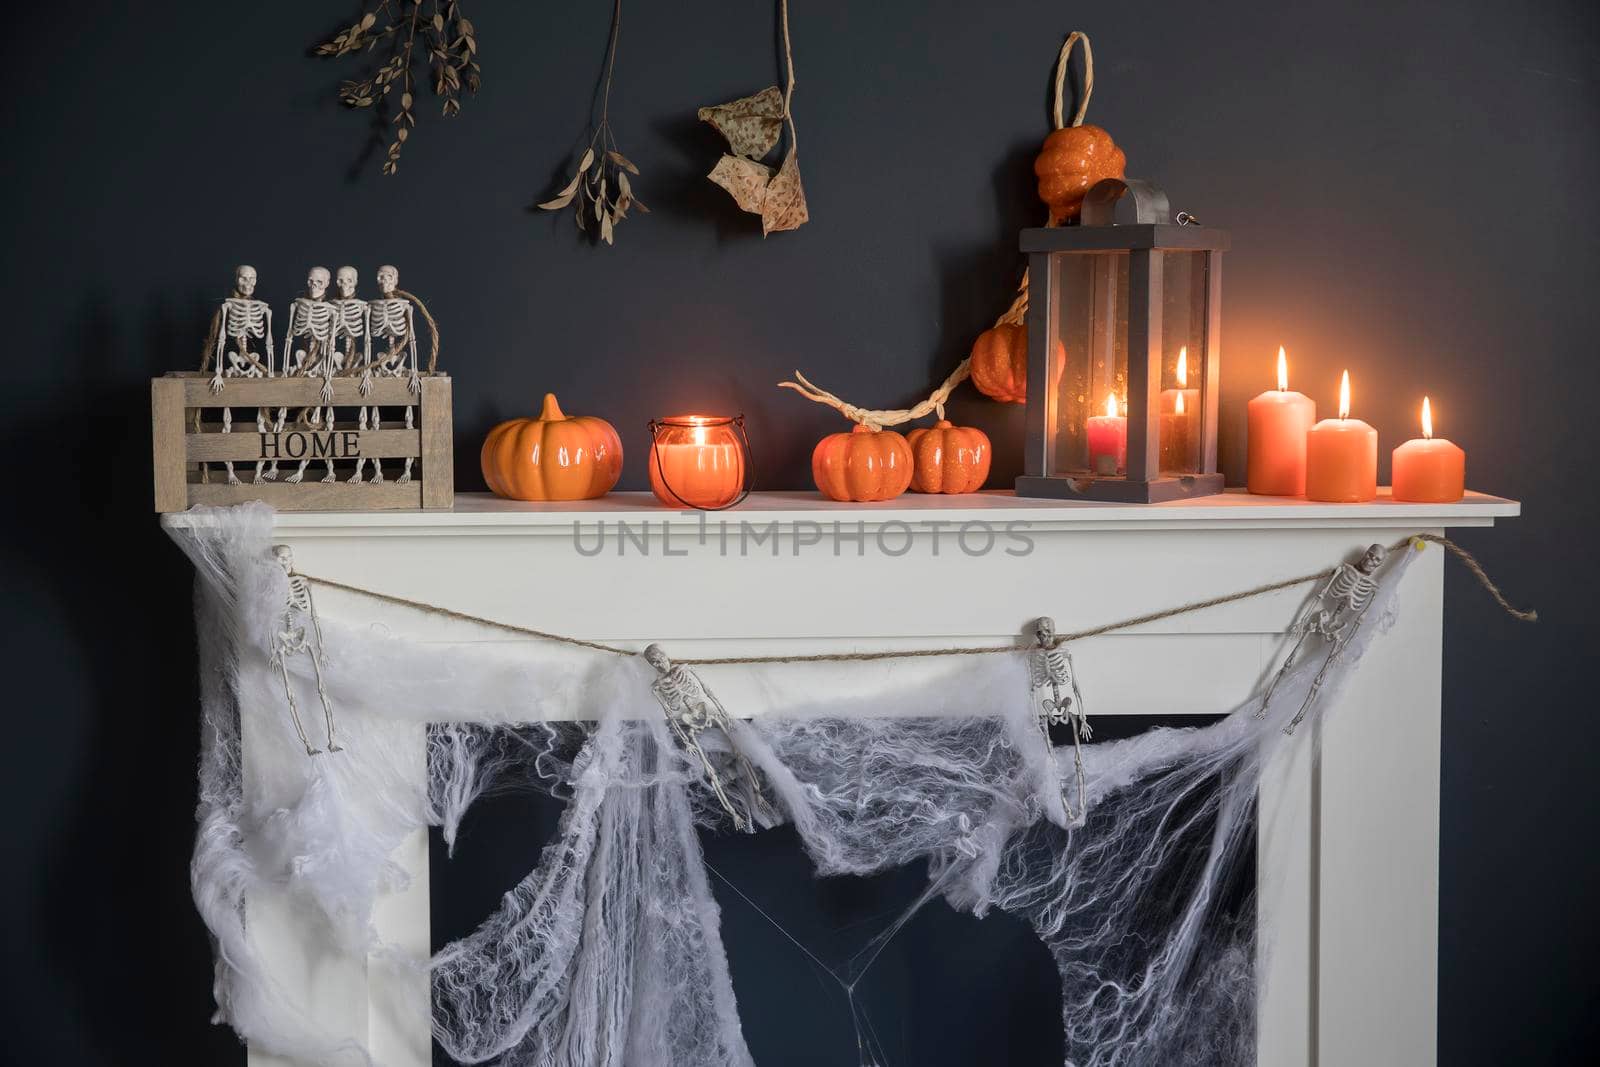 Halloween home decoration. Plastic toy skeletons in a wooden box on a fireplace against a dark blue wall. A garland of skeletons. Cobweb on the dresser. Orange candles and lantern. by elenarostunova